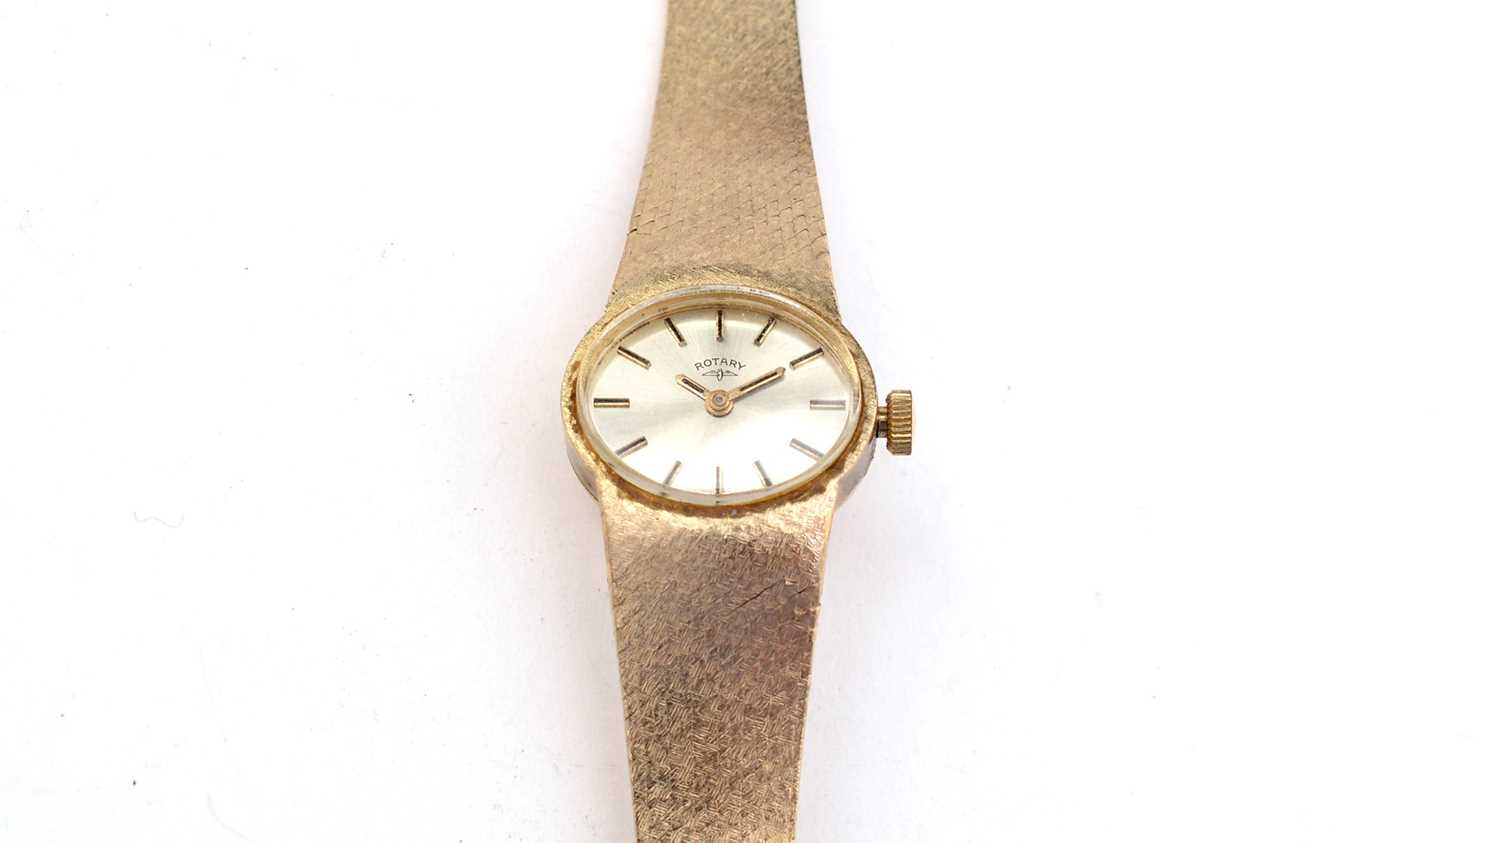 Lot 201 - A 9ct yellow gold cocktail watch by Rotary